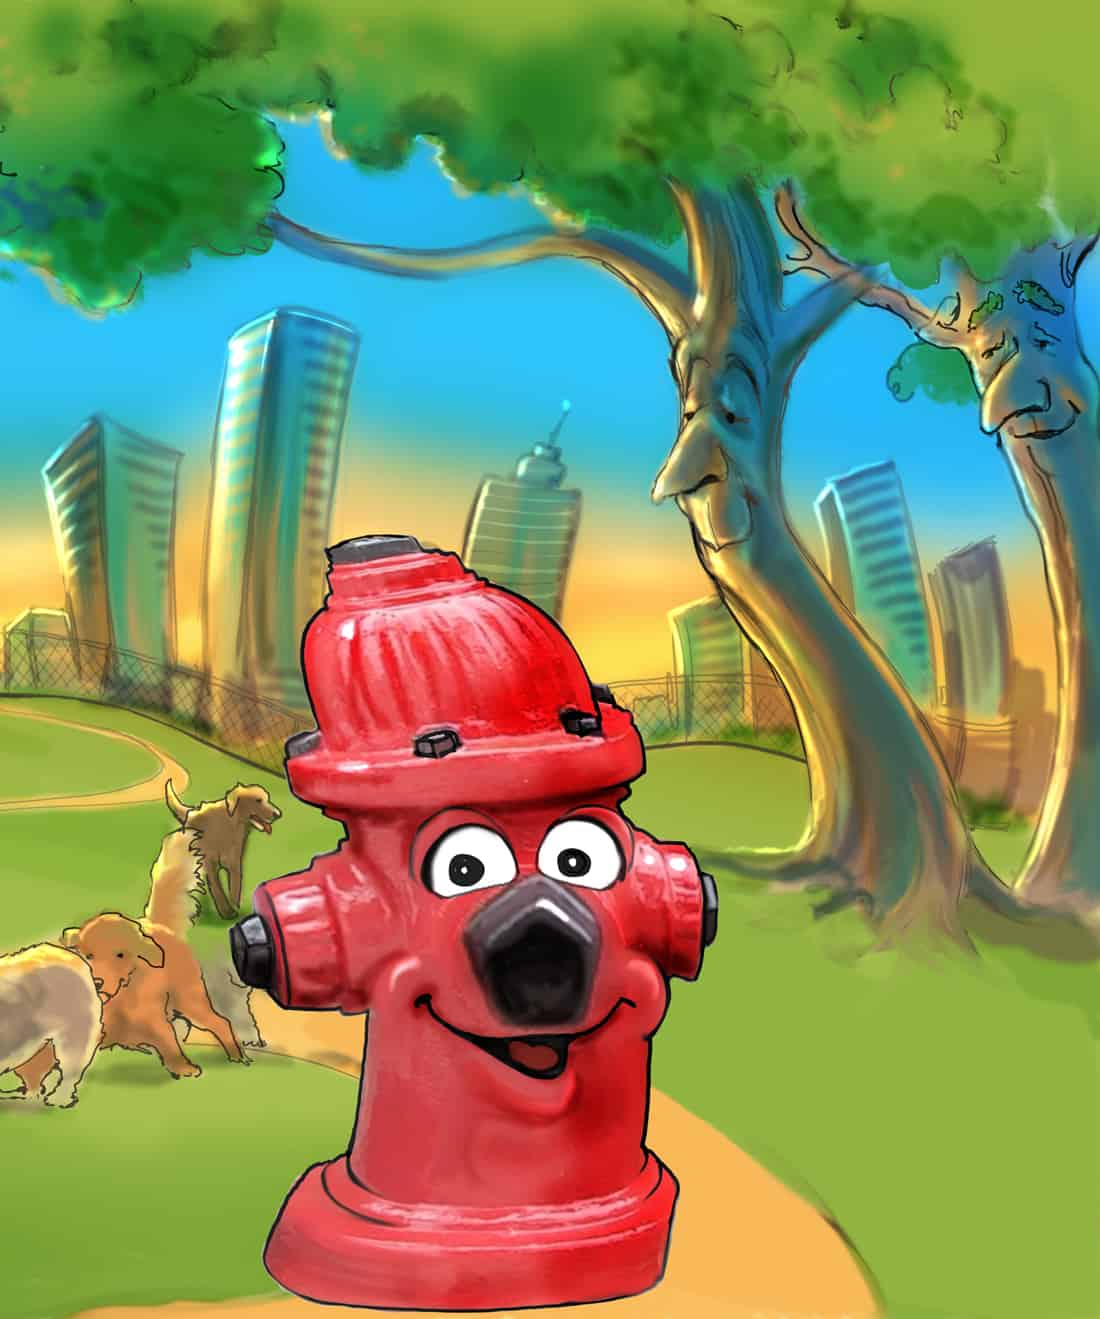 hydrant and trees, kids show, environment